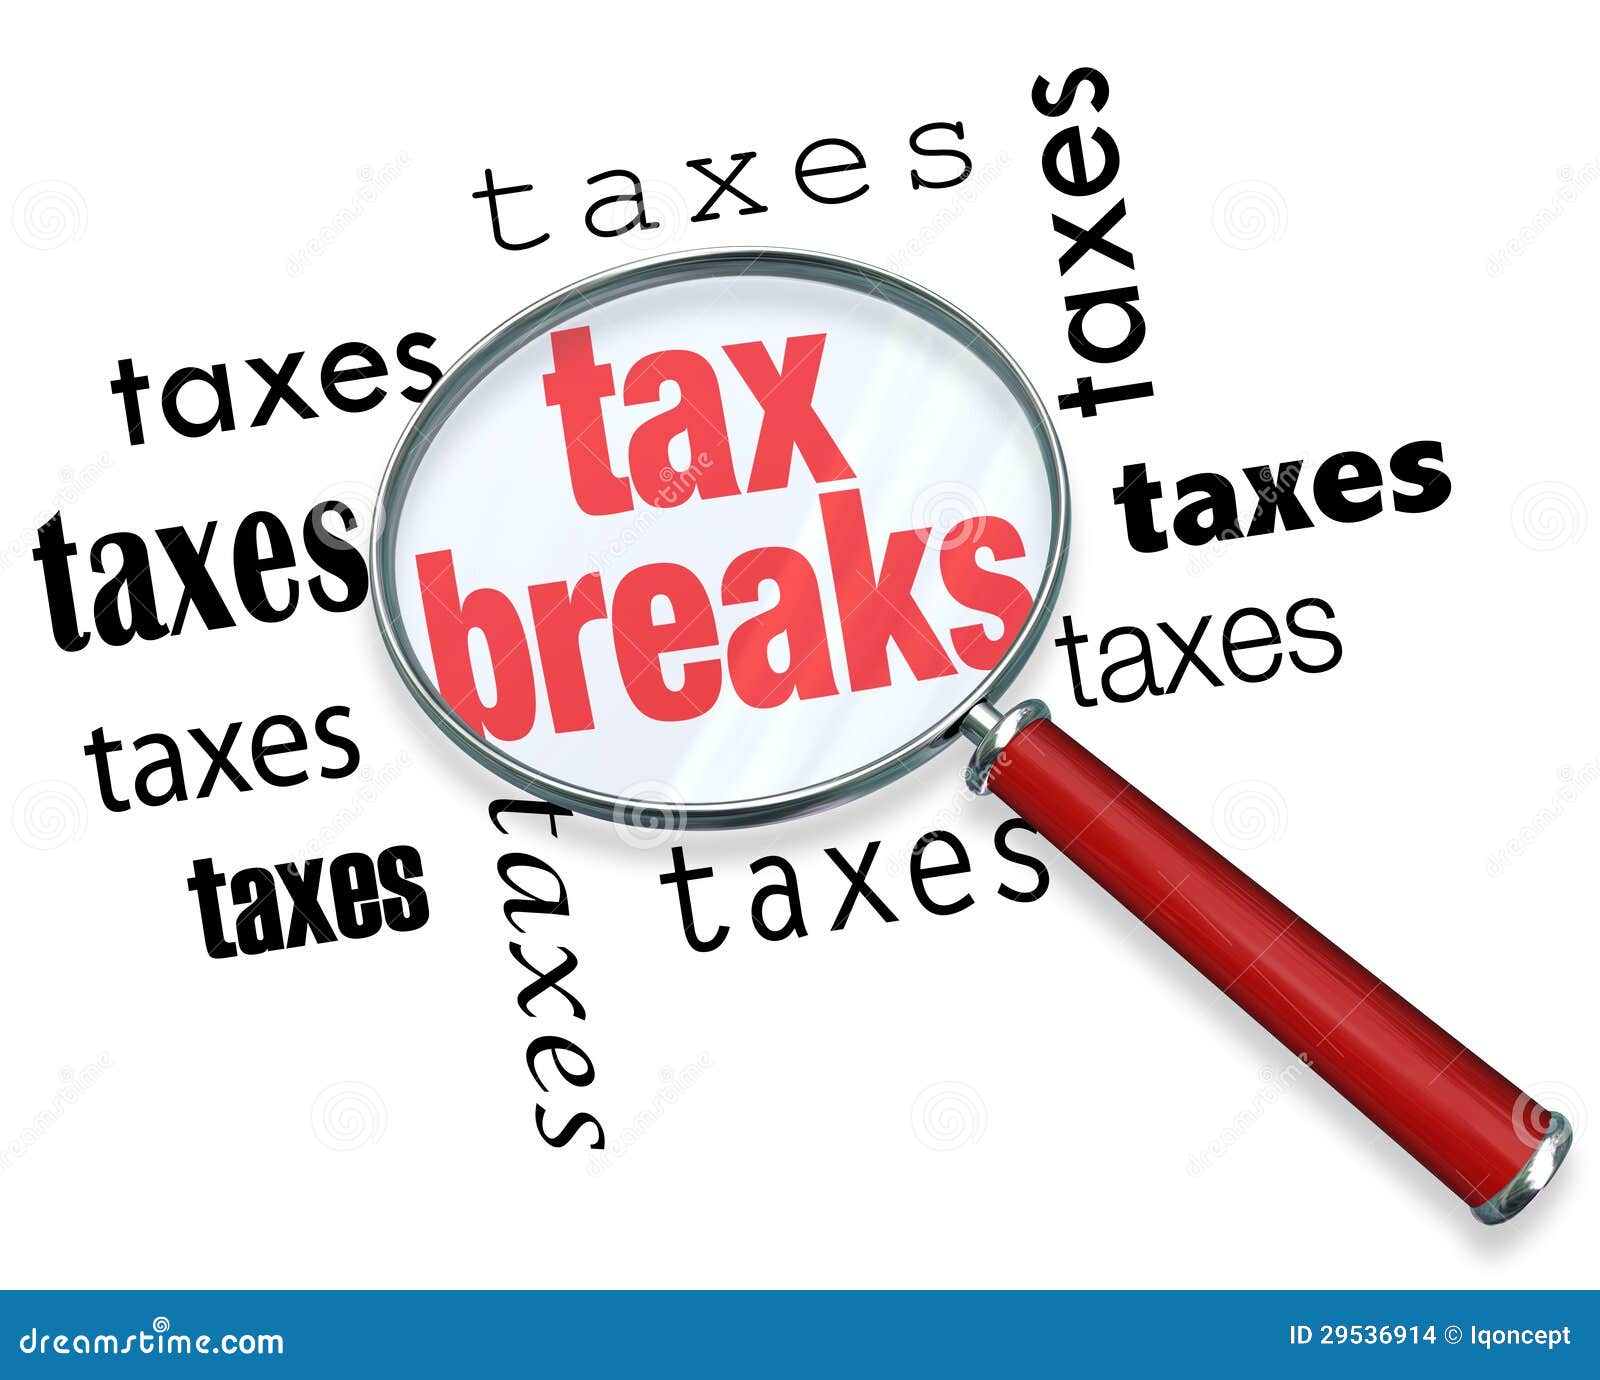 how to find tax breaks - magnifying glass